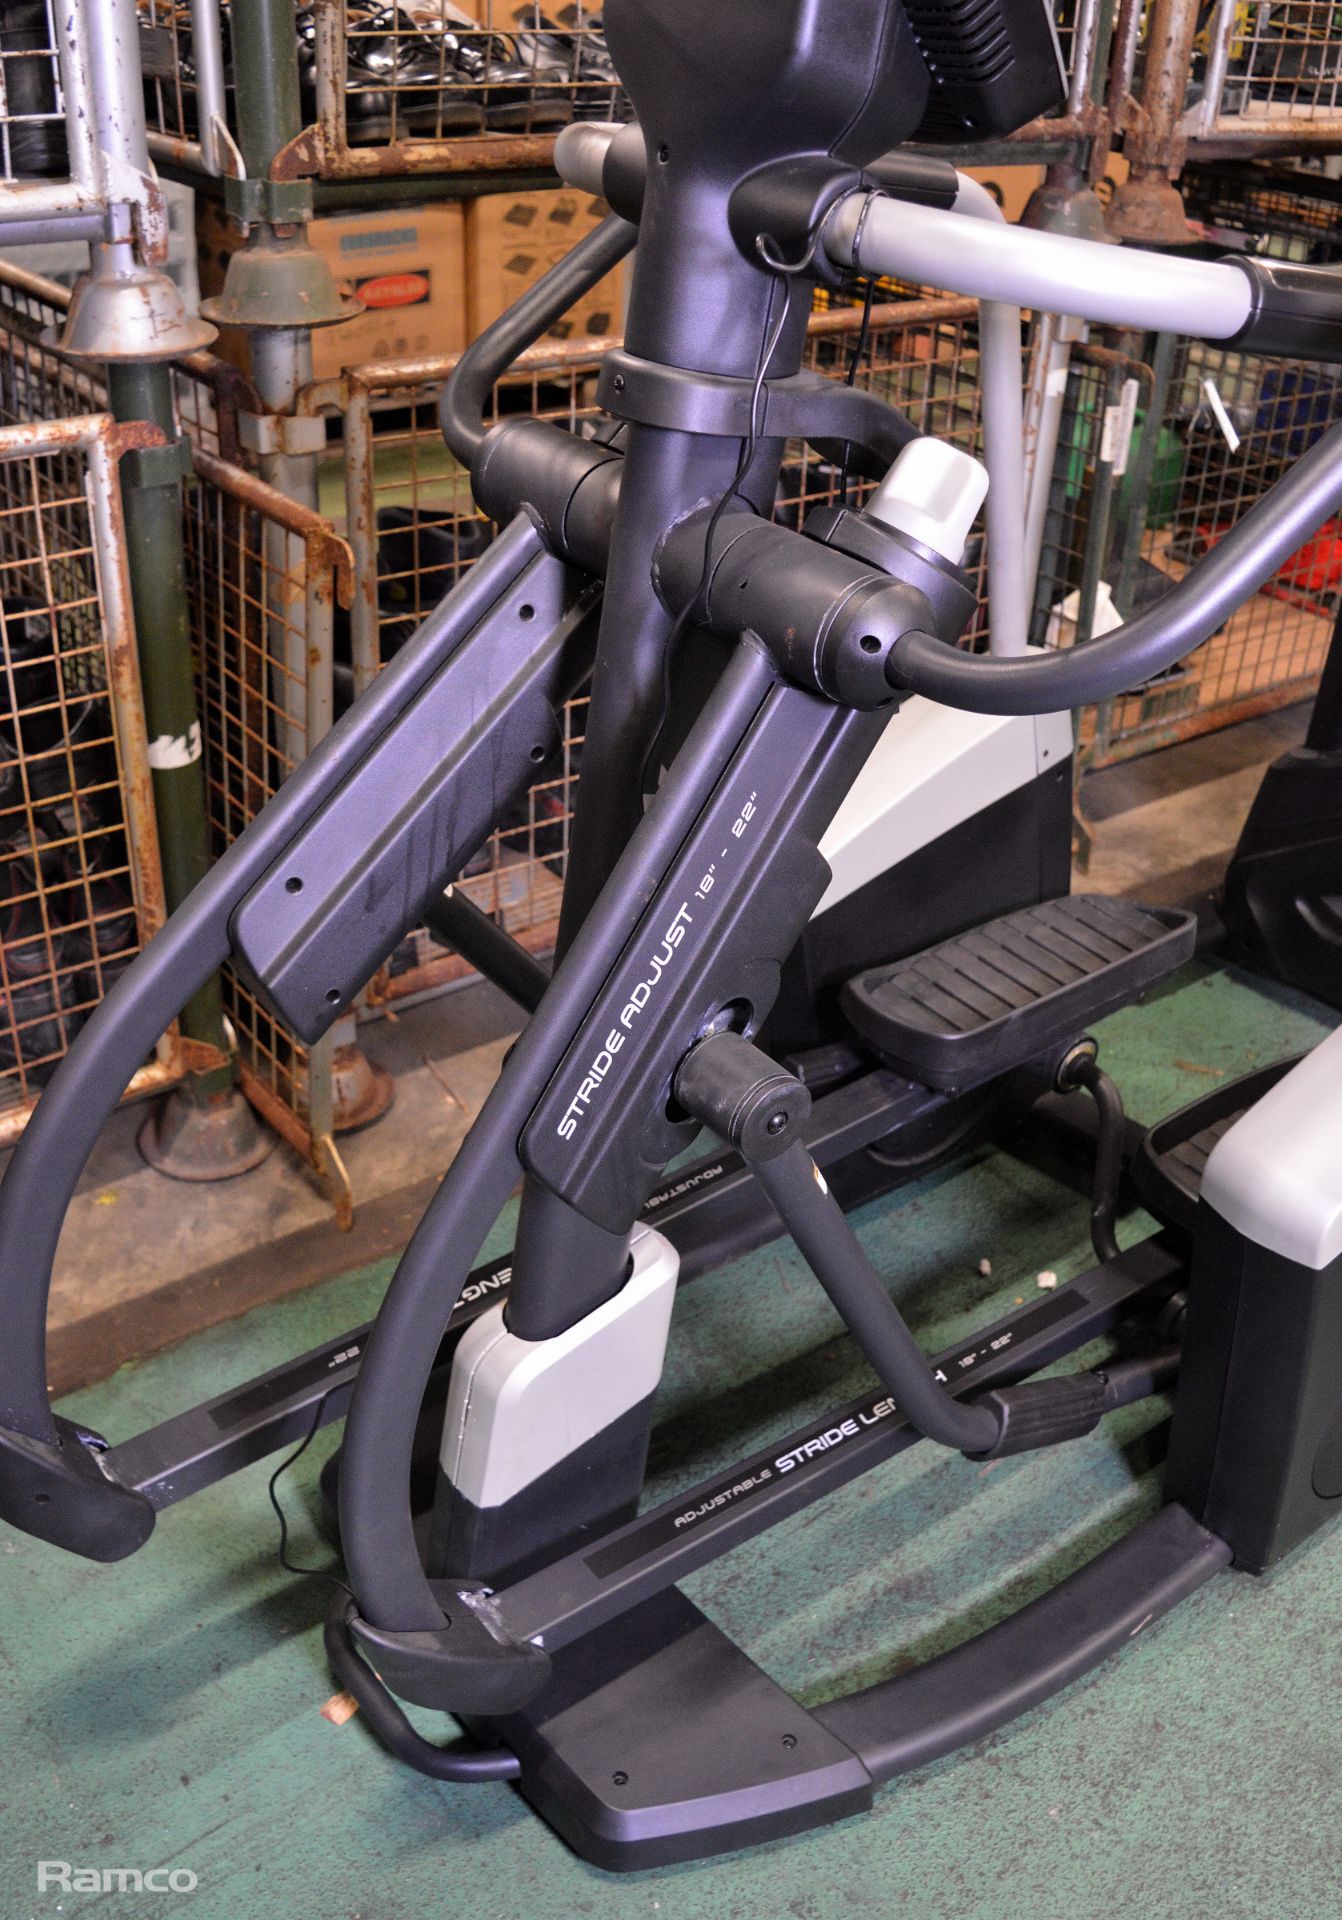 NordicTrack ACT Elliptical Cross Trainer - stride length - Image 4 of 7